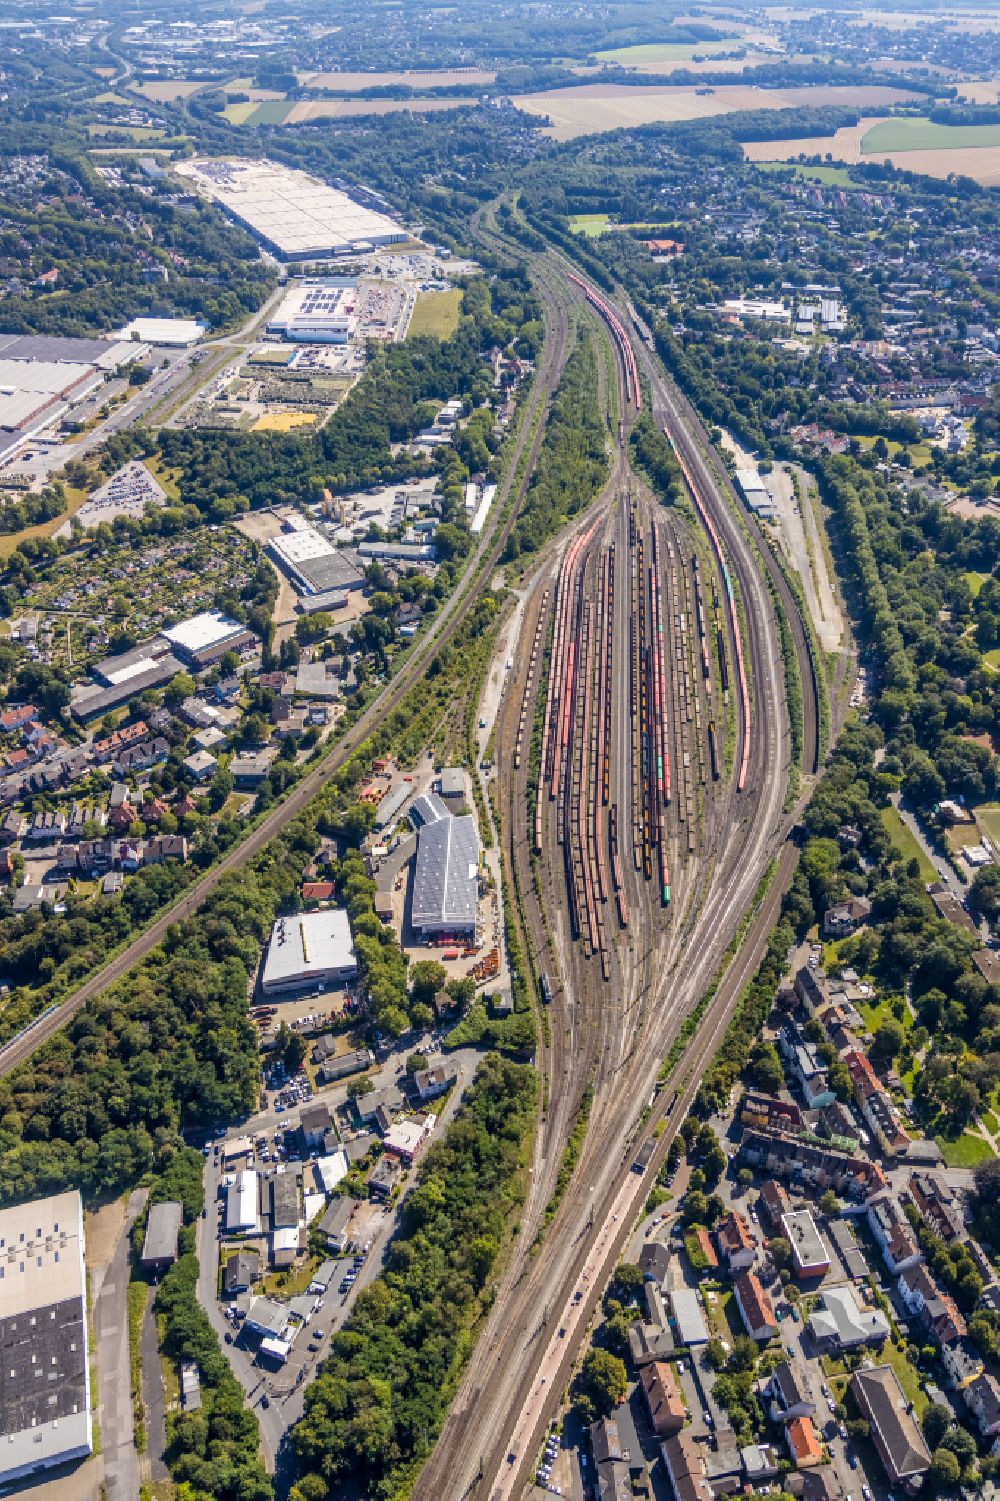 Aerial image Bochum - Marshalling yard and freight station of the Deutsche Bahn in Bochum in the state North Rhine-Westphalia, Germany